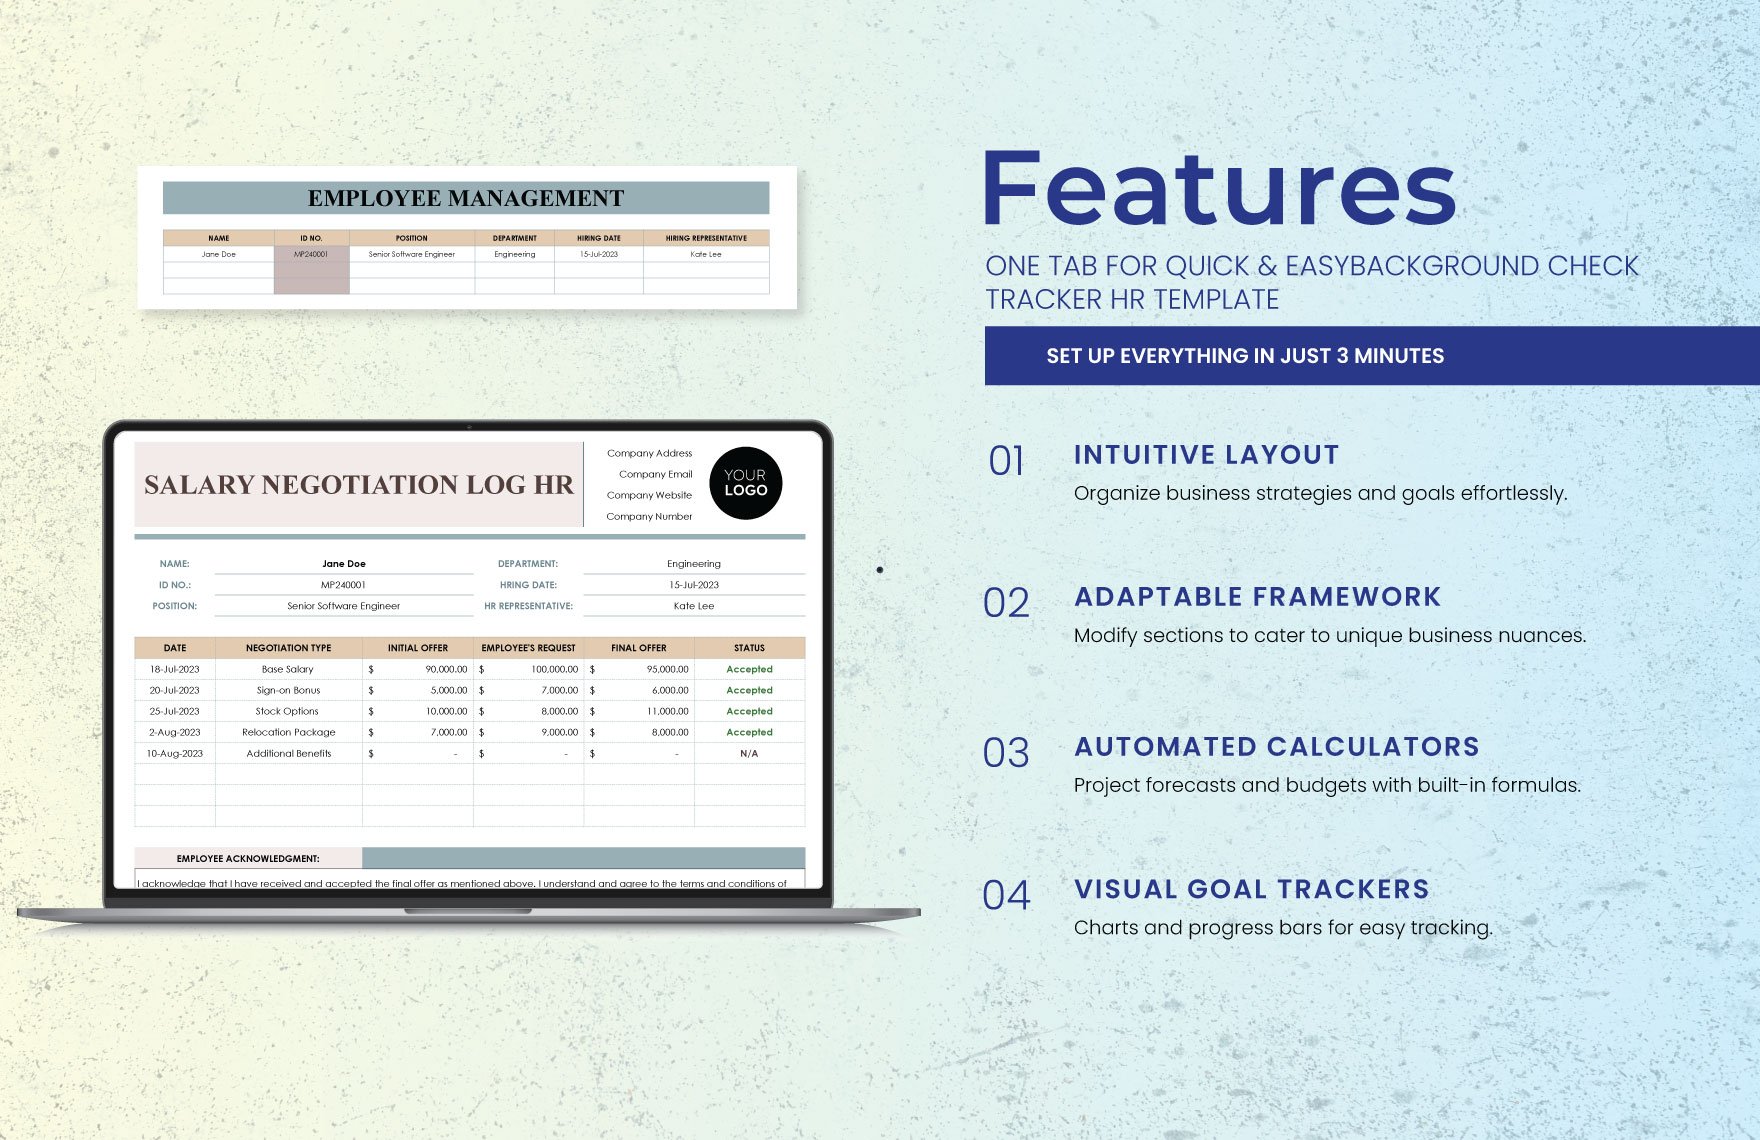 Background Check Tracker HR Template